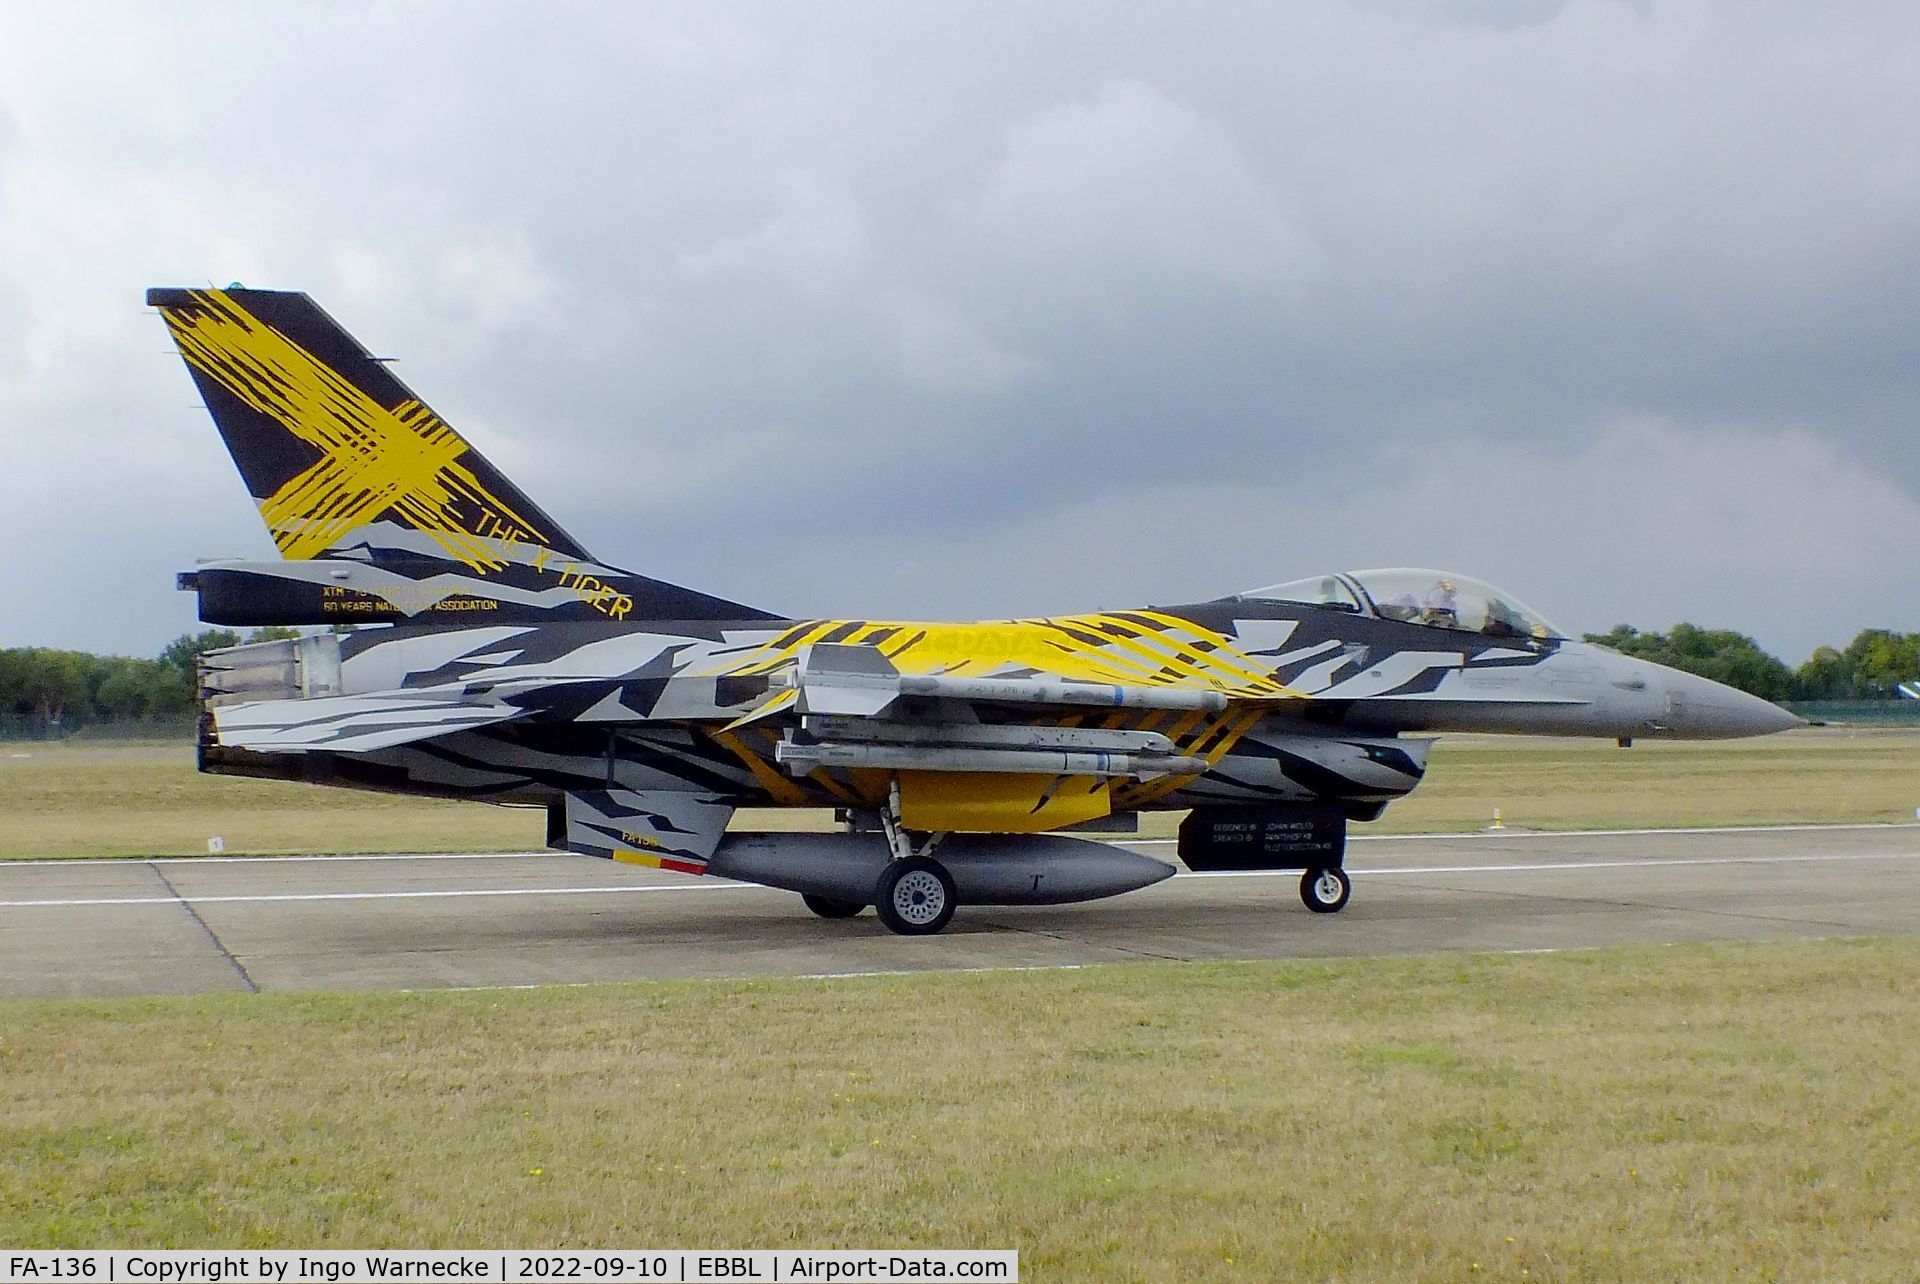 FA-136, SABCA F-16AM Fighting Falcon C/N 6H-136, General Dynamics (SABCA) F-16AM Fighting Falcon of the FAeB (Belgian air force) in 'X-Tiger' special colours at the 2022 Sanicole Spottersday at Kleine Brogel air base